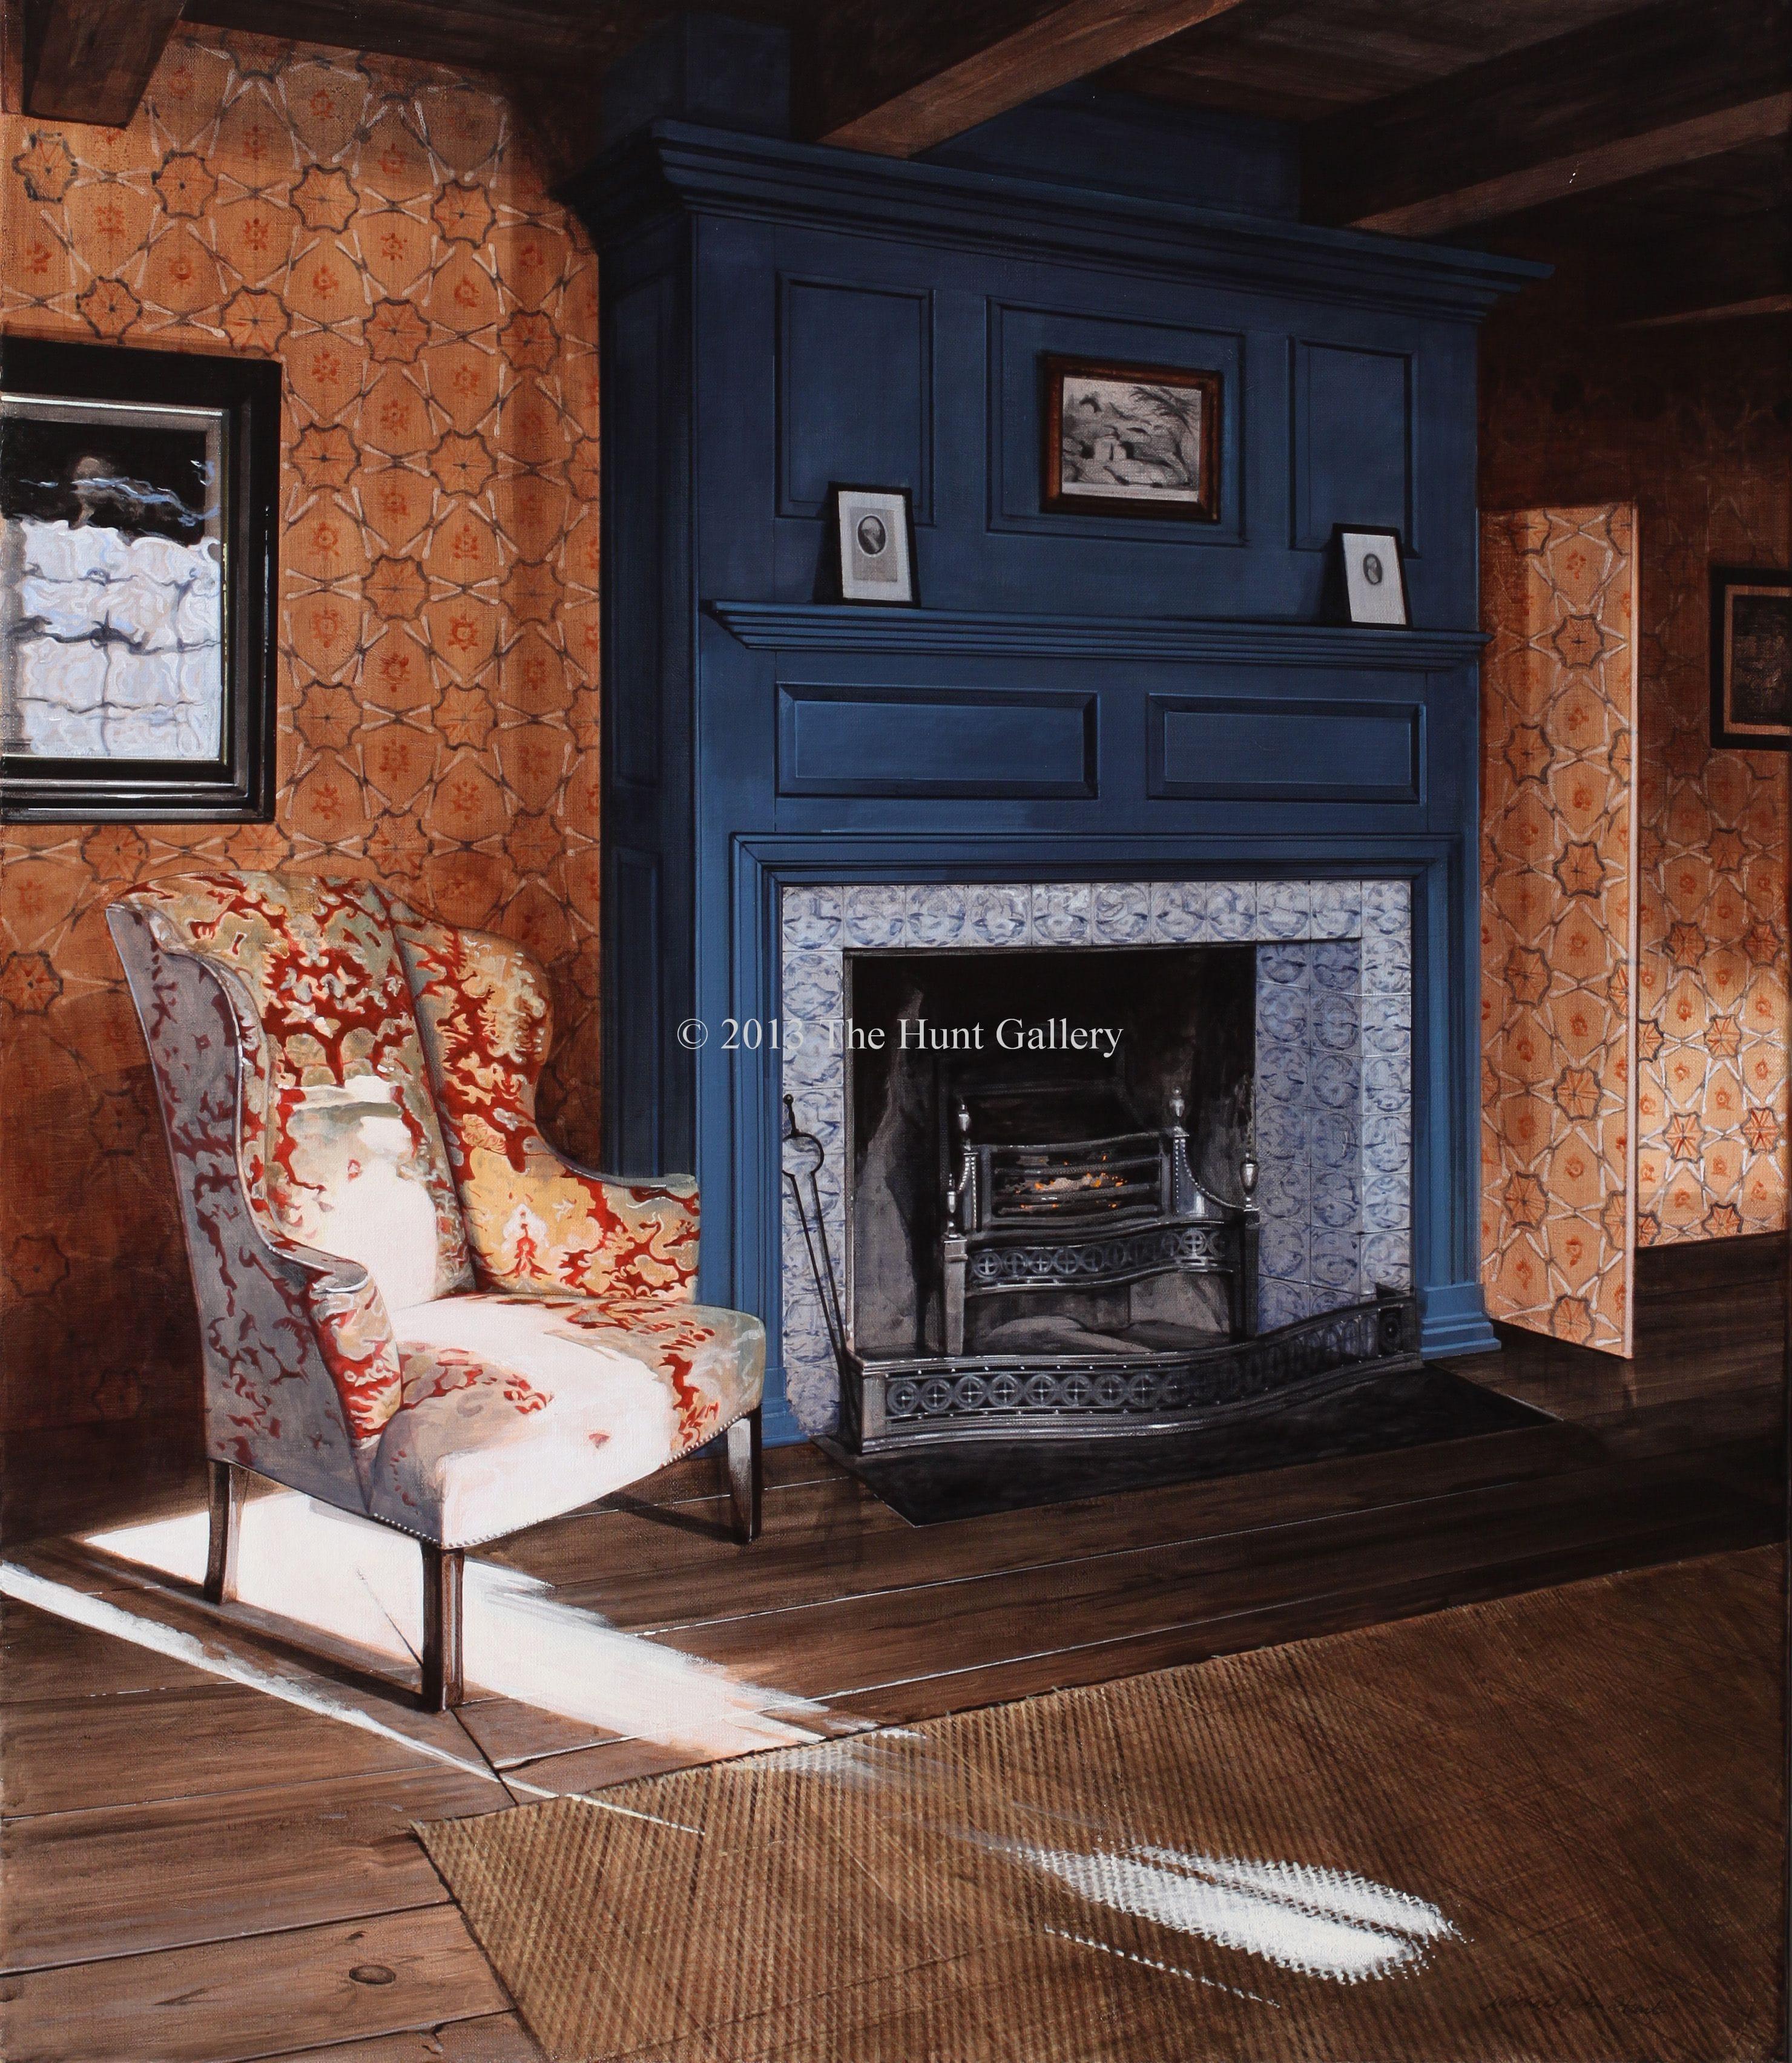 The Hearth
by
Michael John Hunt

30" x 26"
Acrylic on canvas

These paintings, by courtesy of the present owner of the property, show the unique interior of one of America 's most important historic houses. Wynkoop House was built in 1767 for